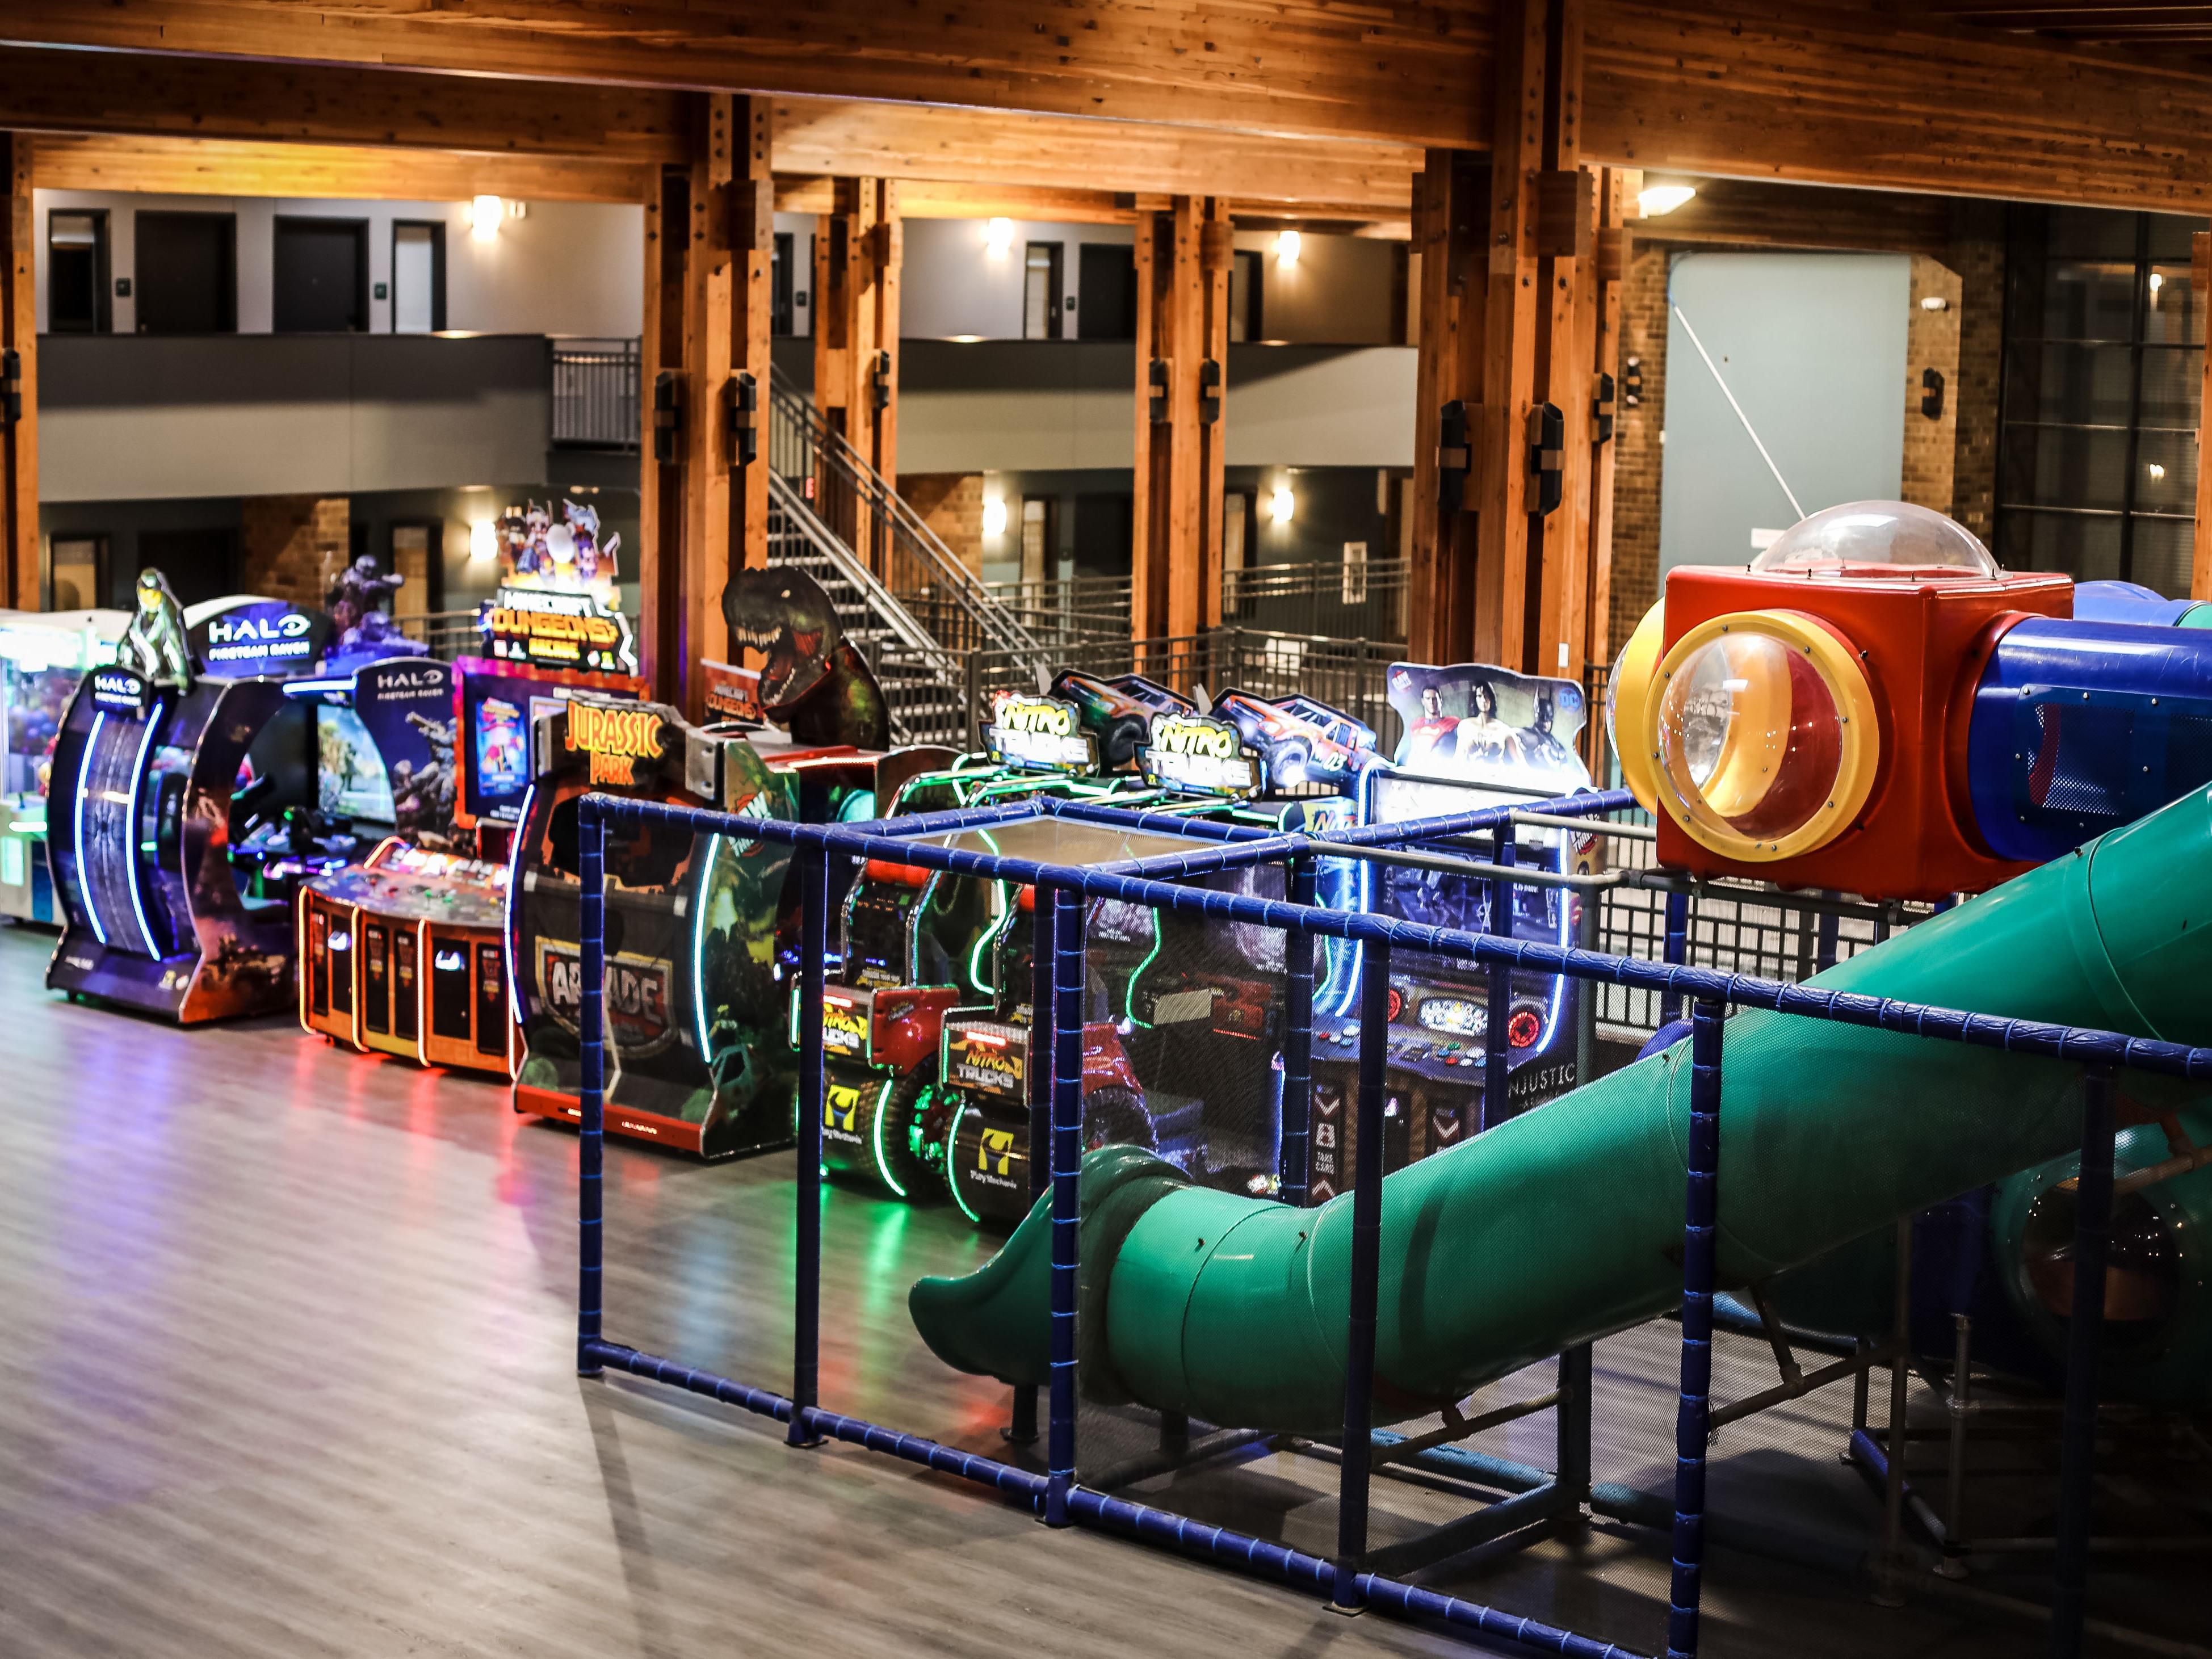 The Holiday Inn & Suites St. Cloud is proud to offer the area's largest indoor recreational facility! Adventure awaits for the whole family in our atrium's jungle gym, arcade center, multiple pools, jacuzzi, basketball and volleyball courts! 